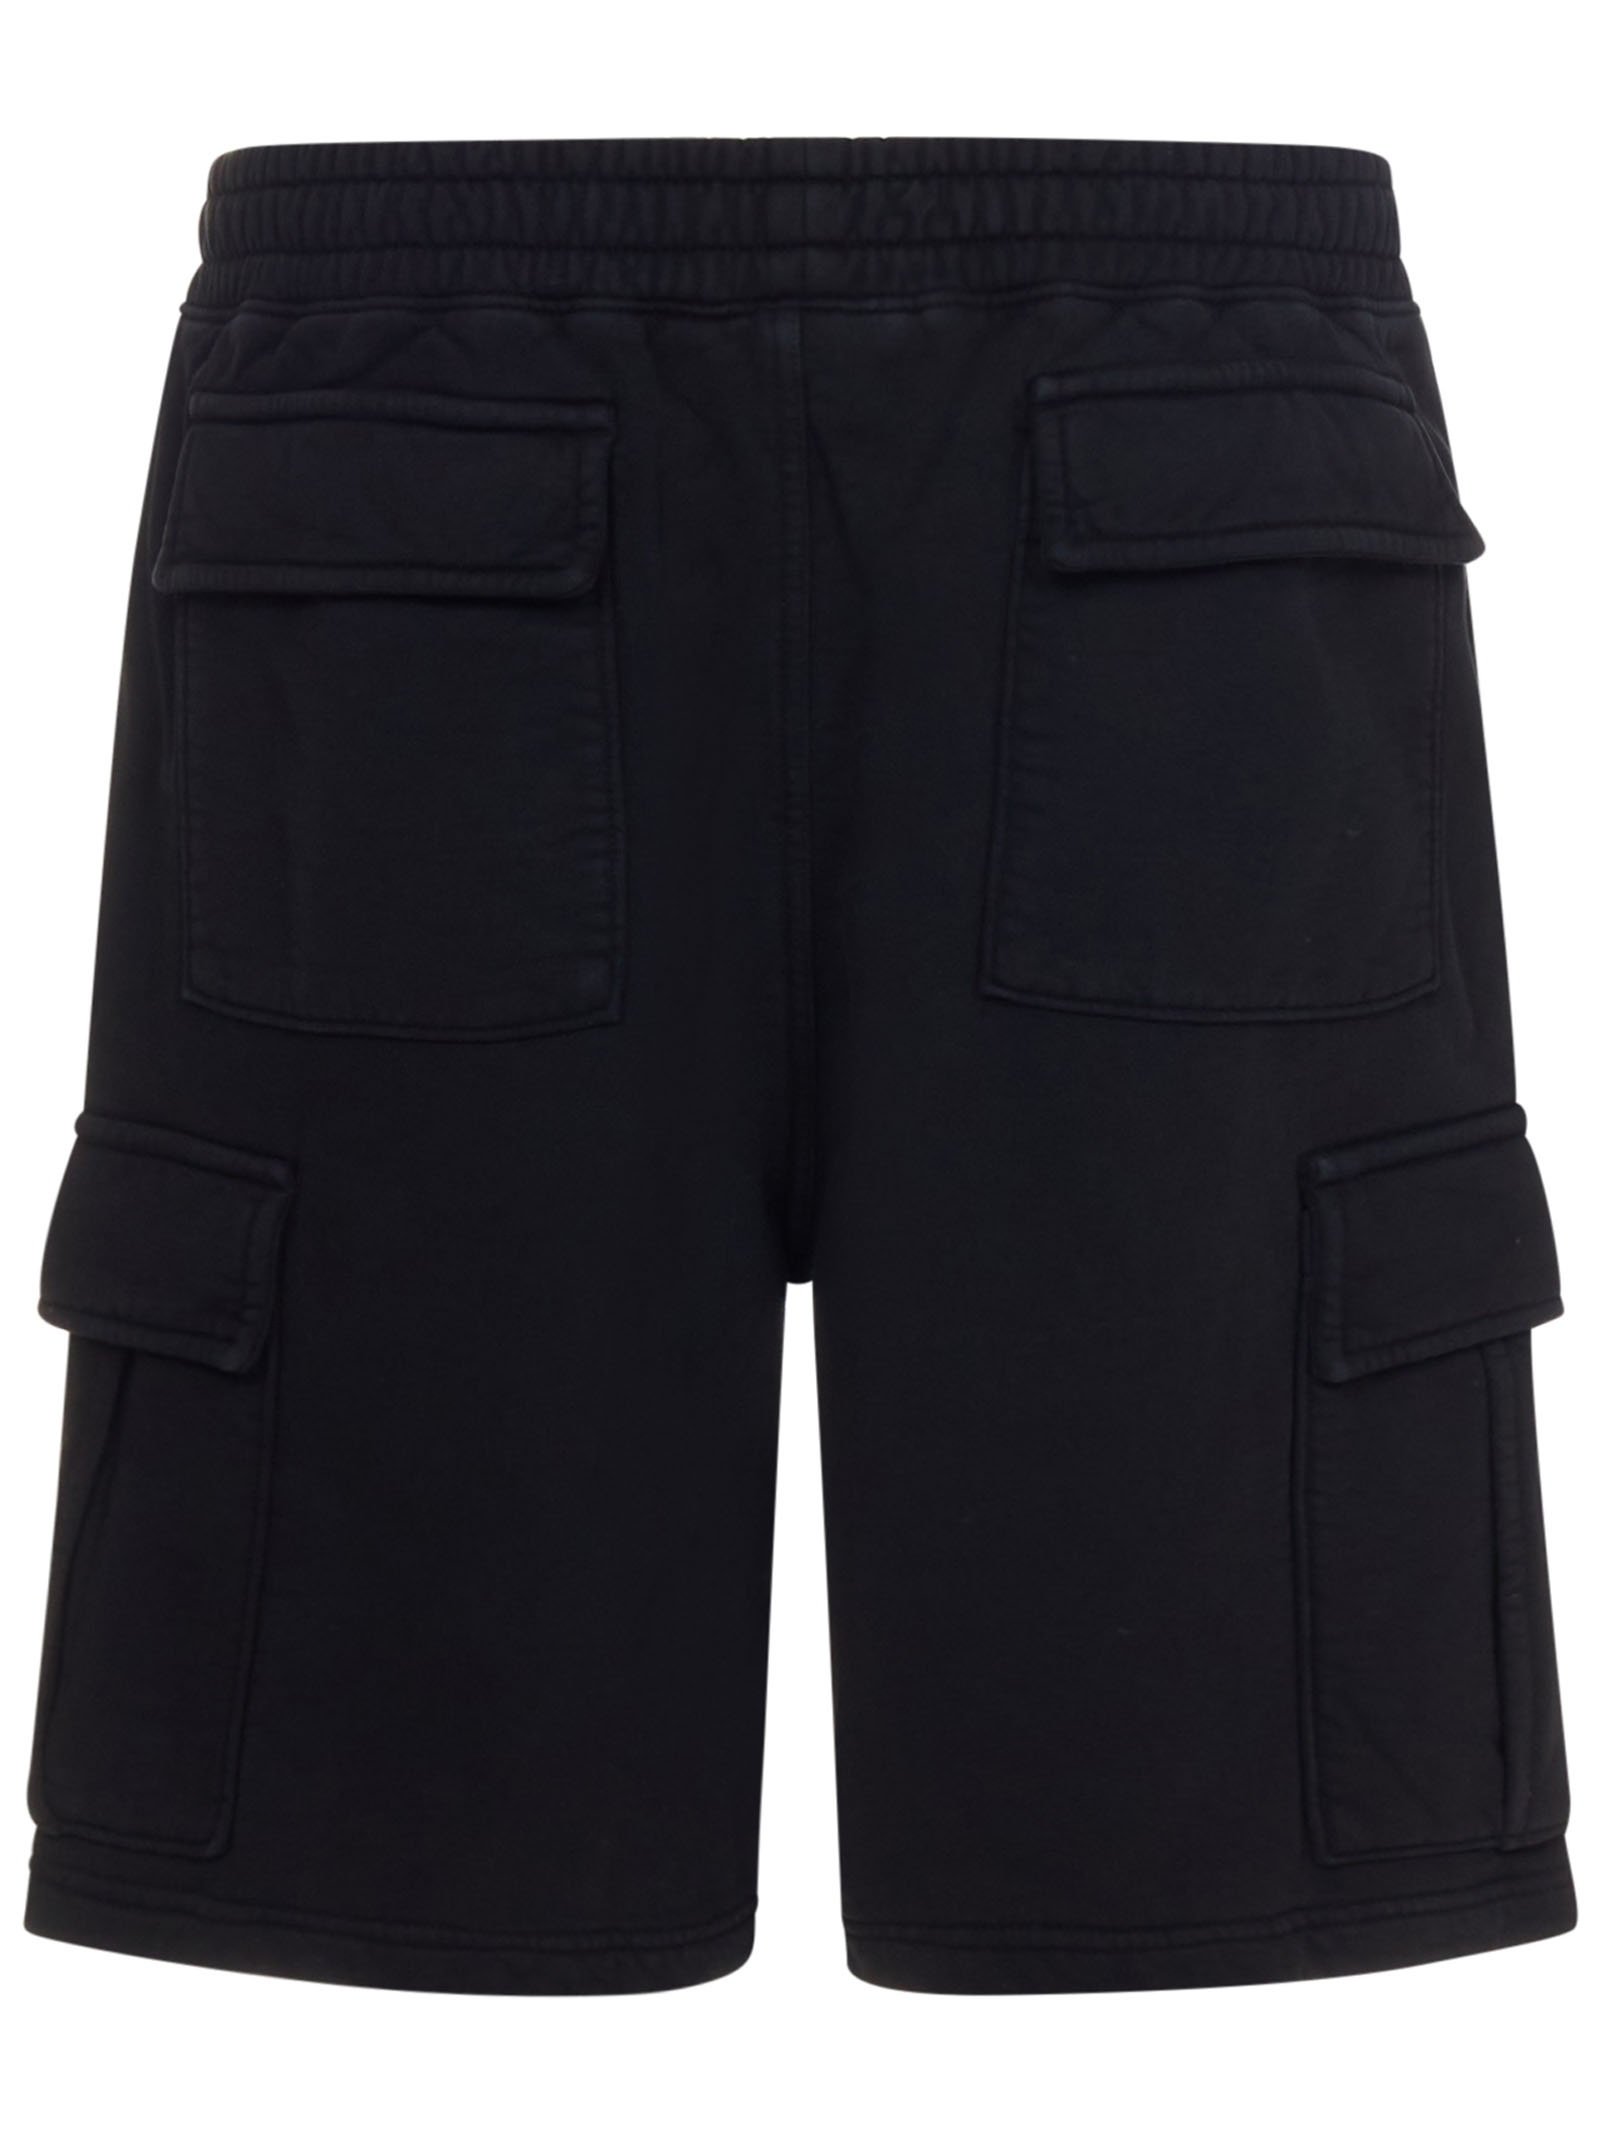 Sports cargo shorts in black cotton with contrasting logo embroidery on the left leg. - 2